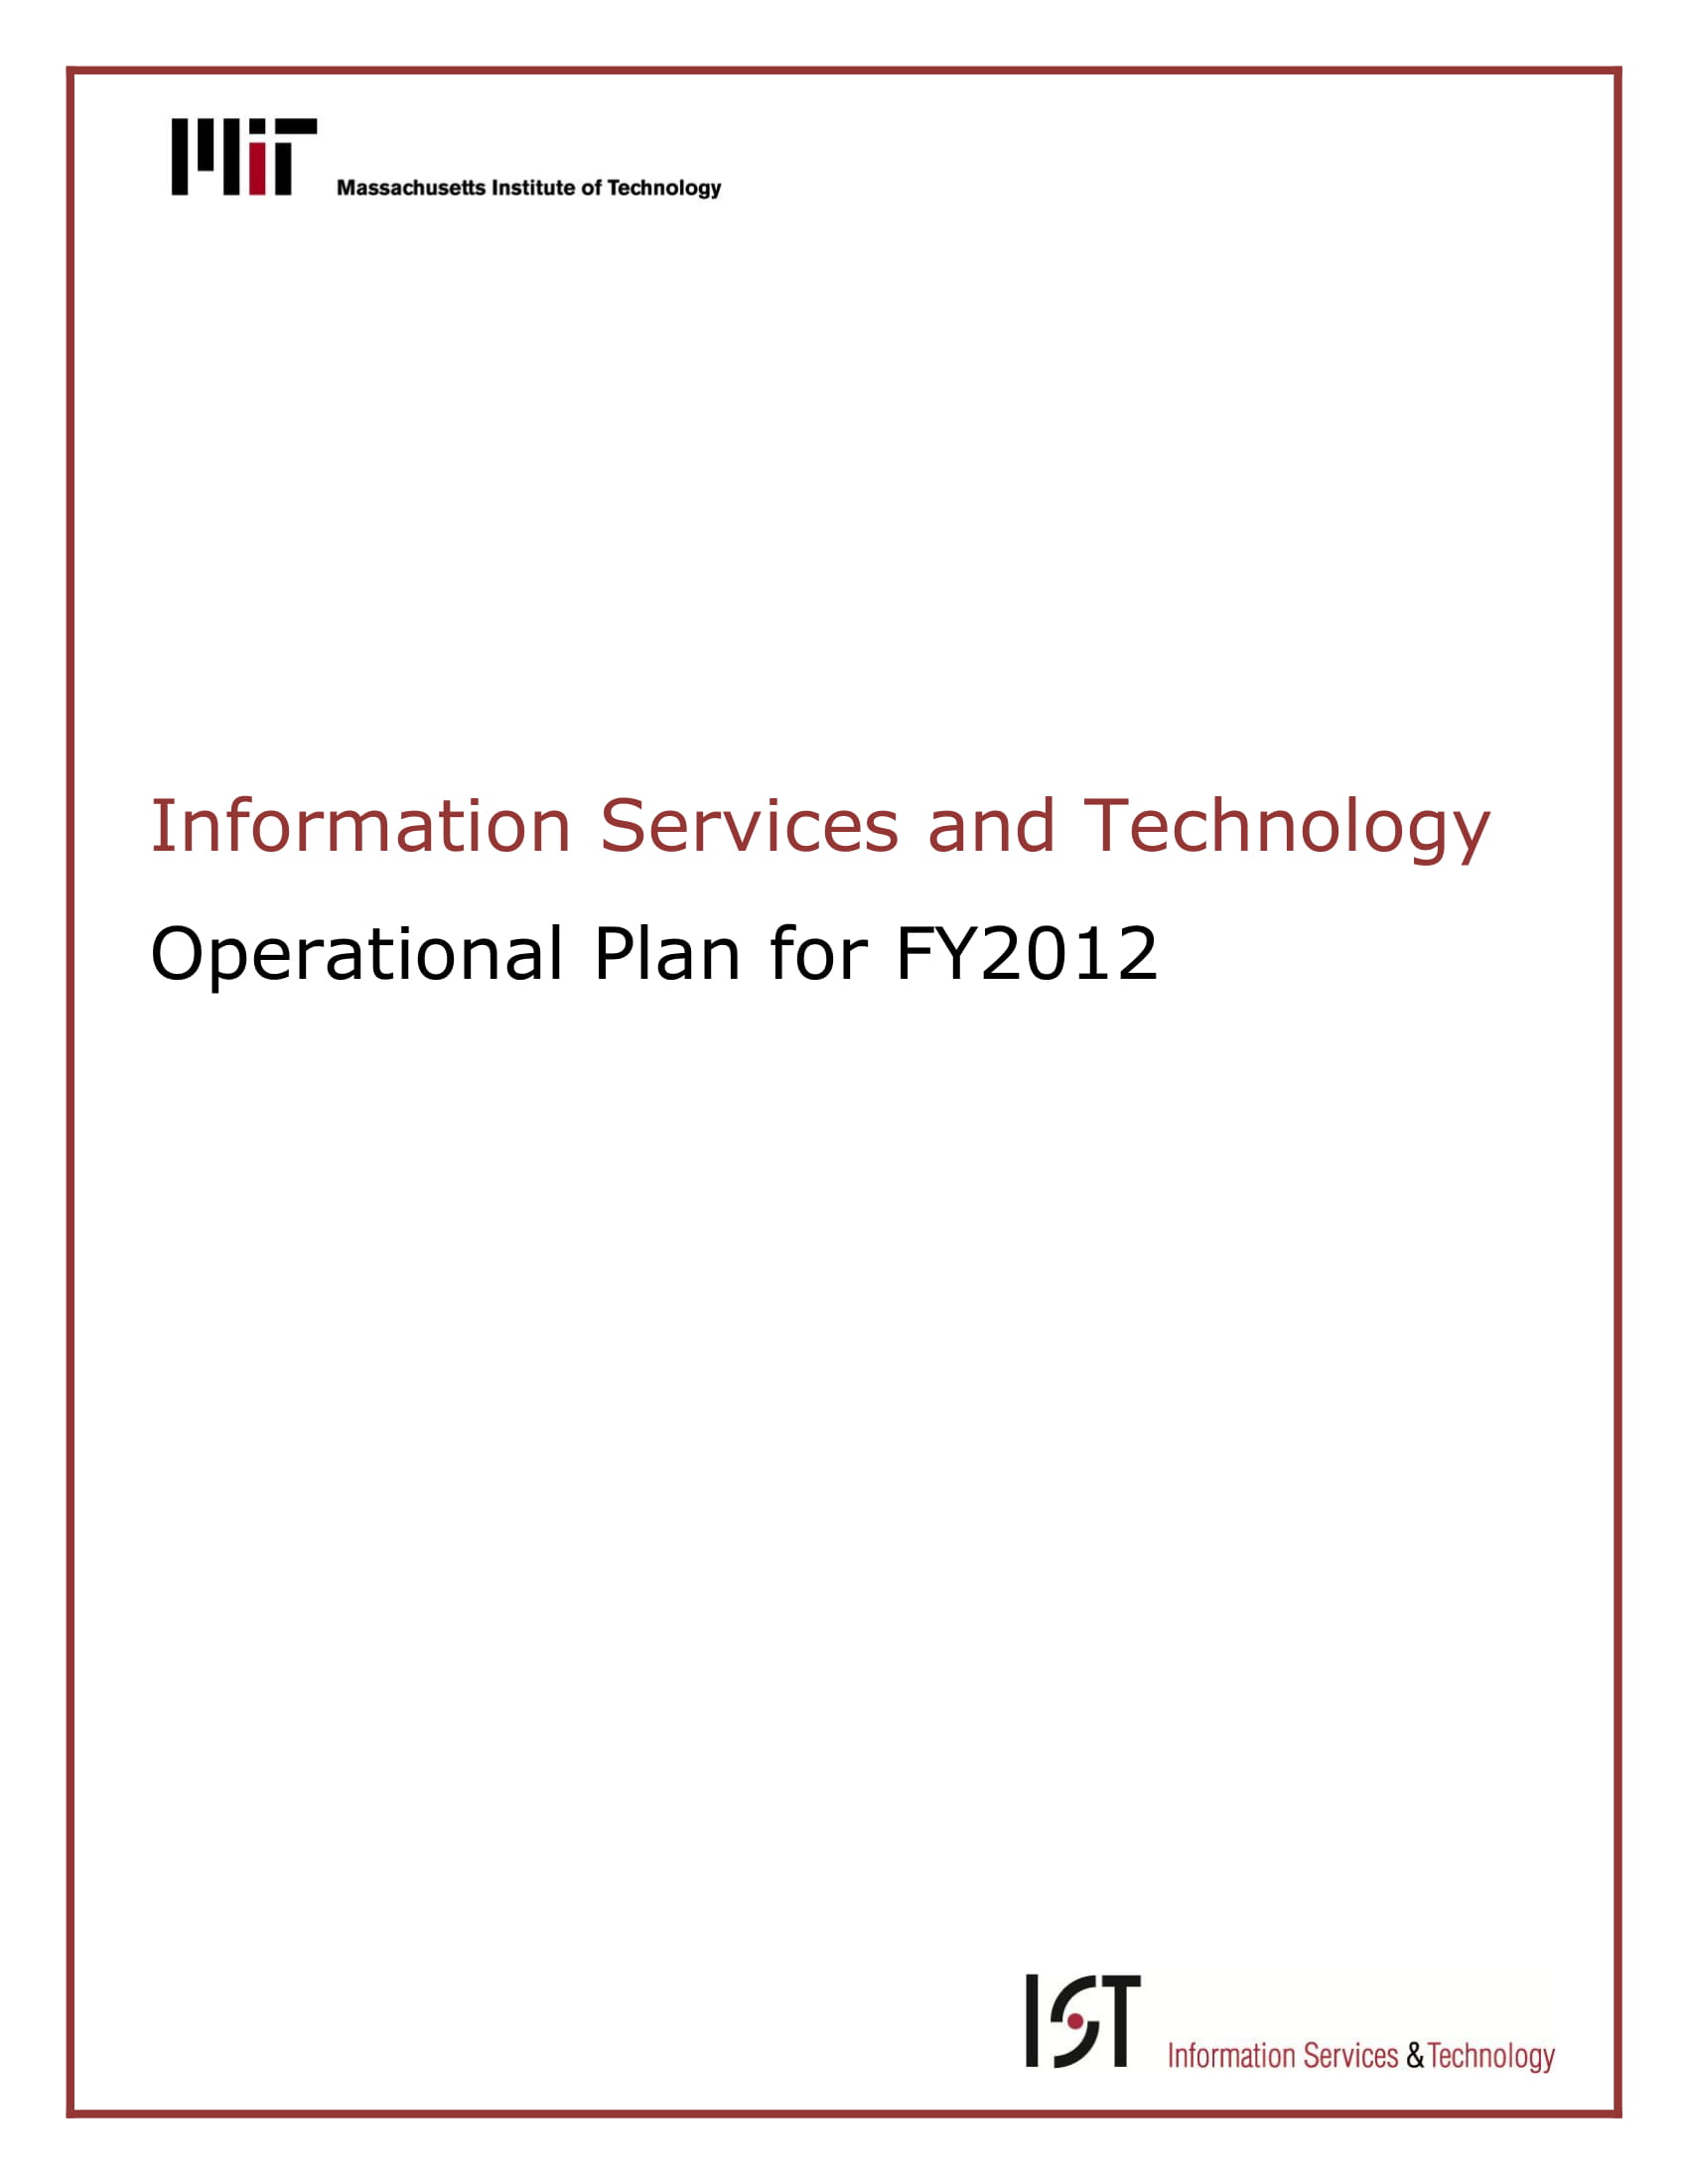 information services and technology operational plan example 01